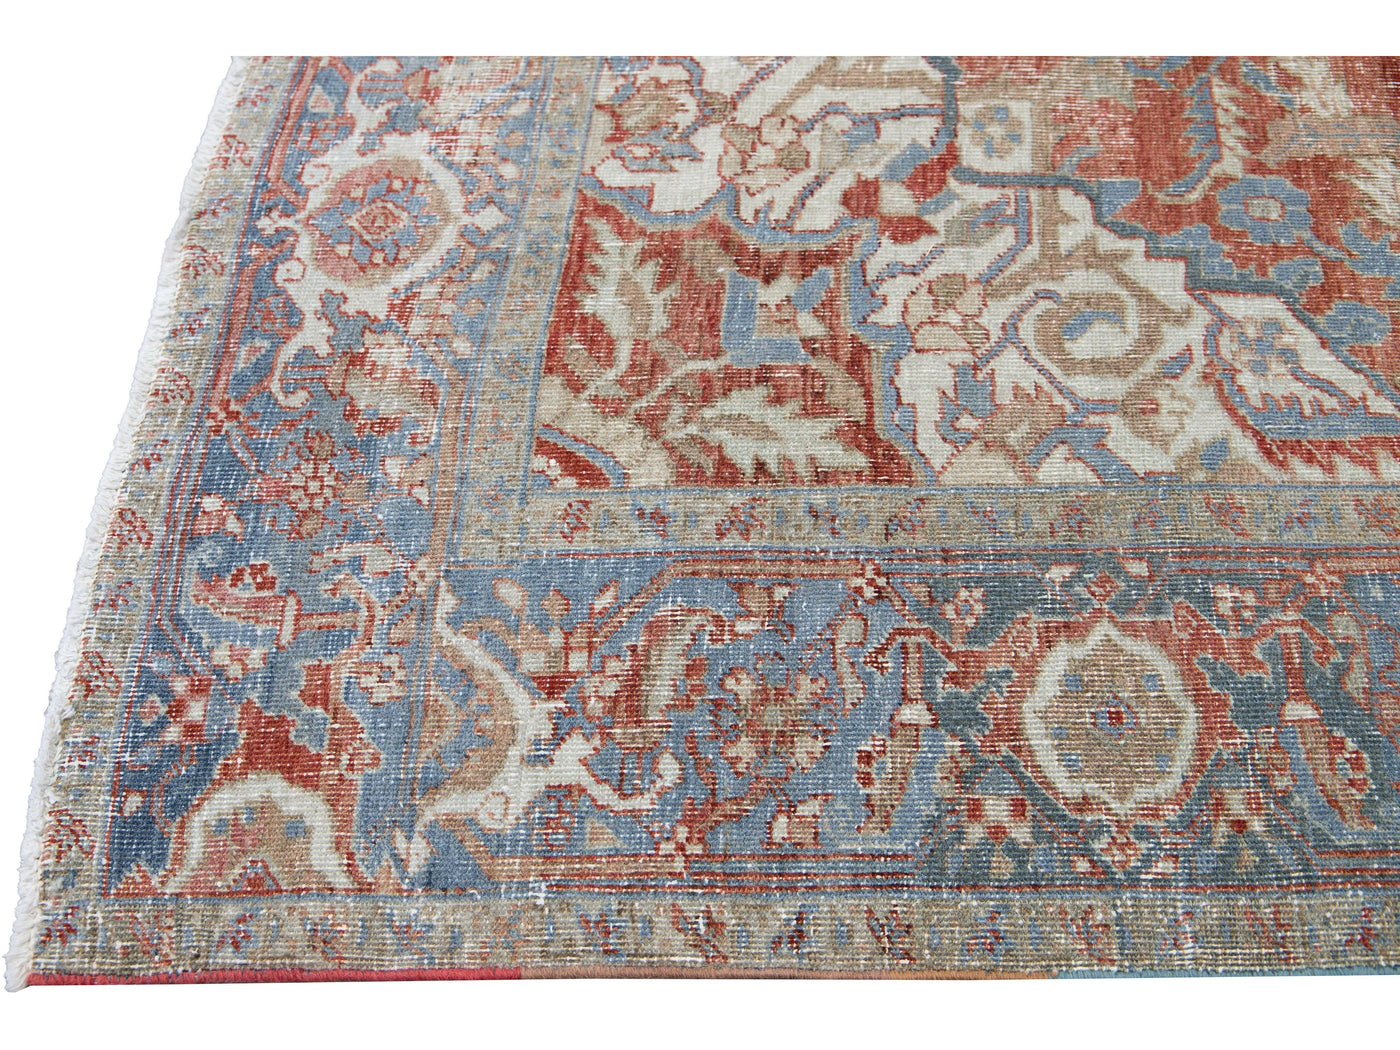 Antique Persian Heriz Handmade Red and Blue Medallion Floral Wool Rug